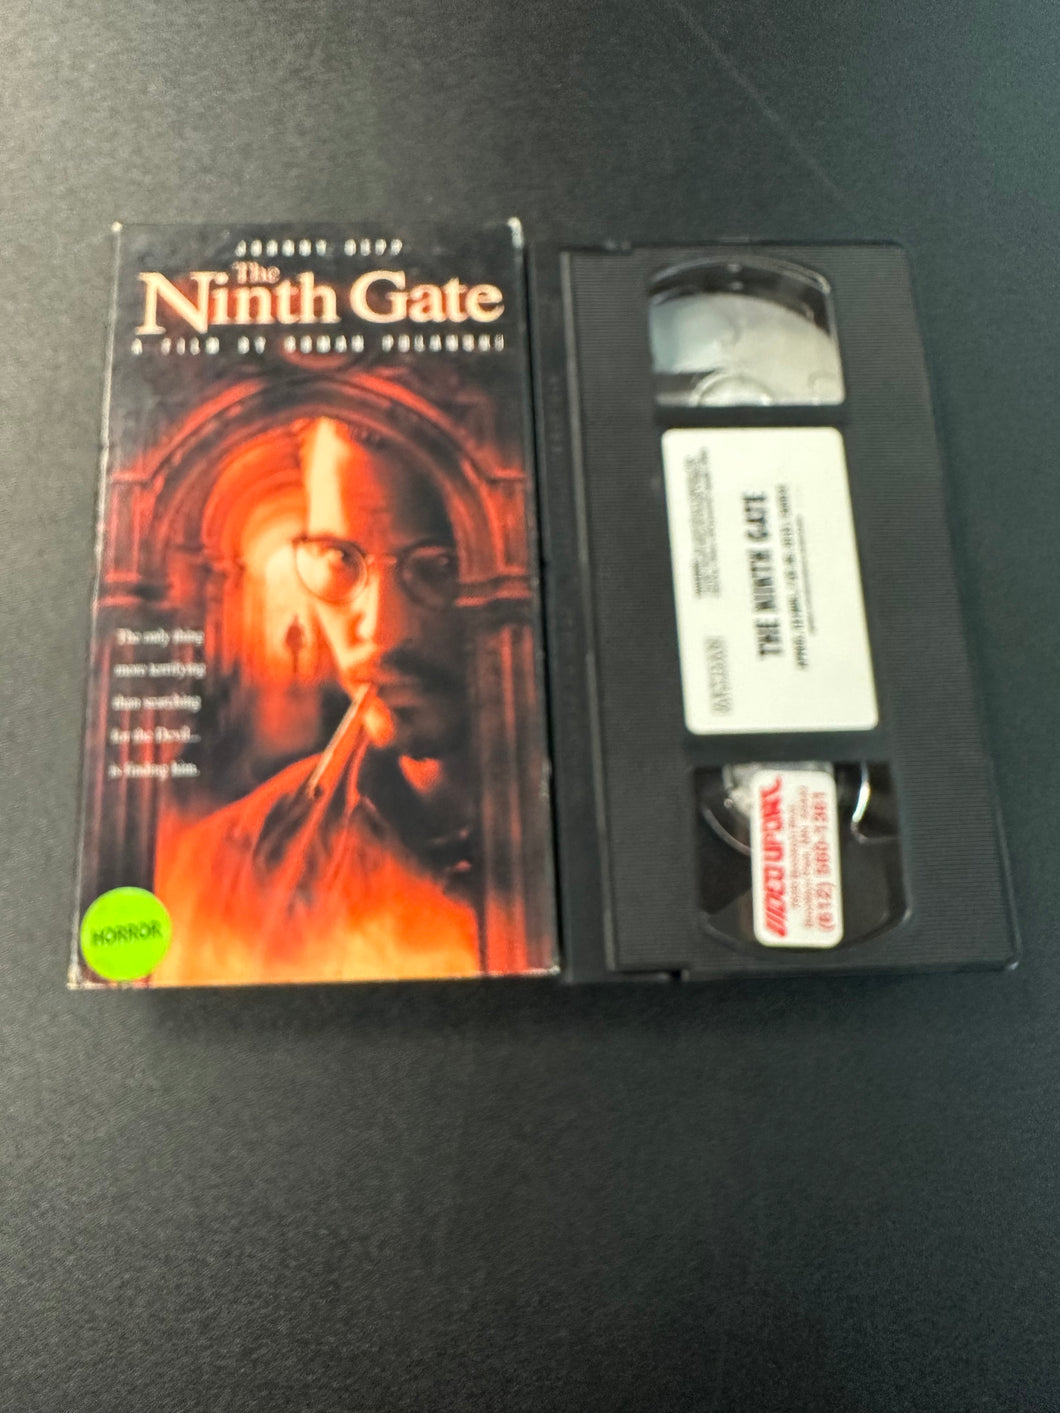 The Ninth Gate Johnny Depp [VHS] PREOWNED Rental